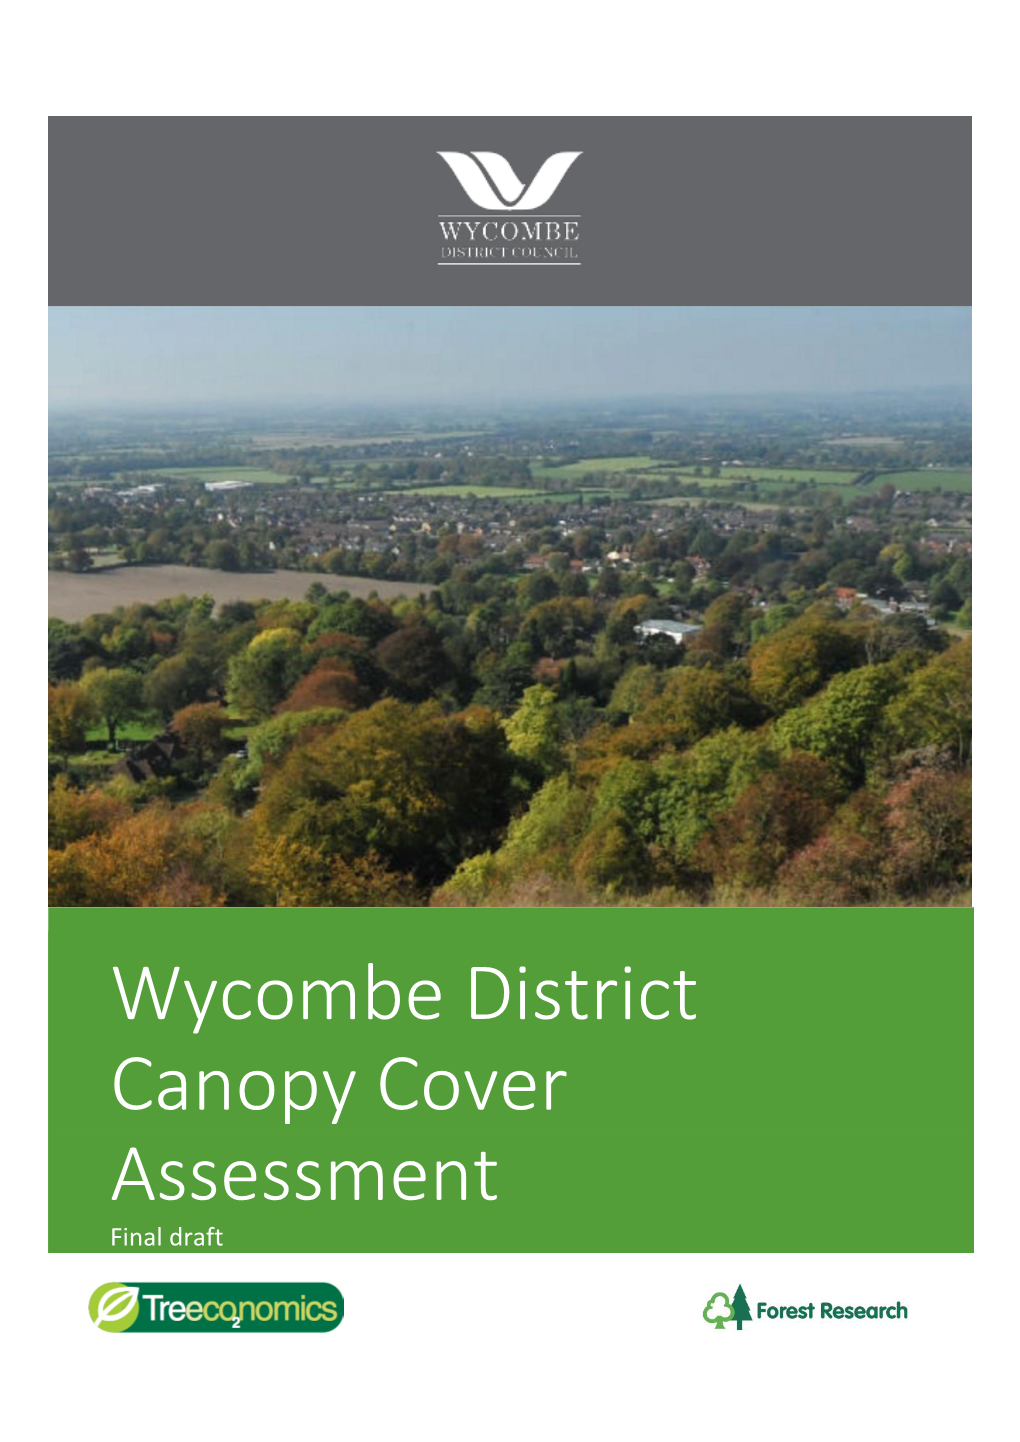 Wycombe District Canopy Cover Assessment Final Draft